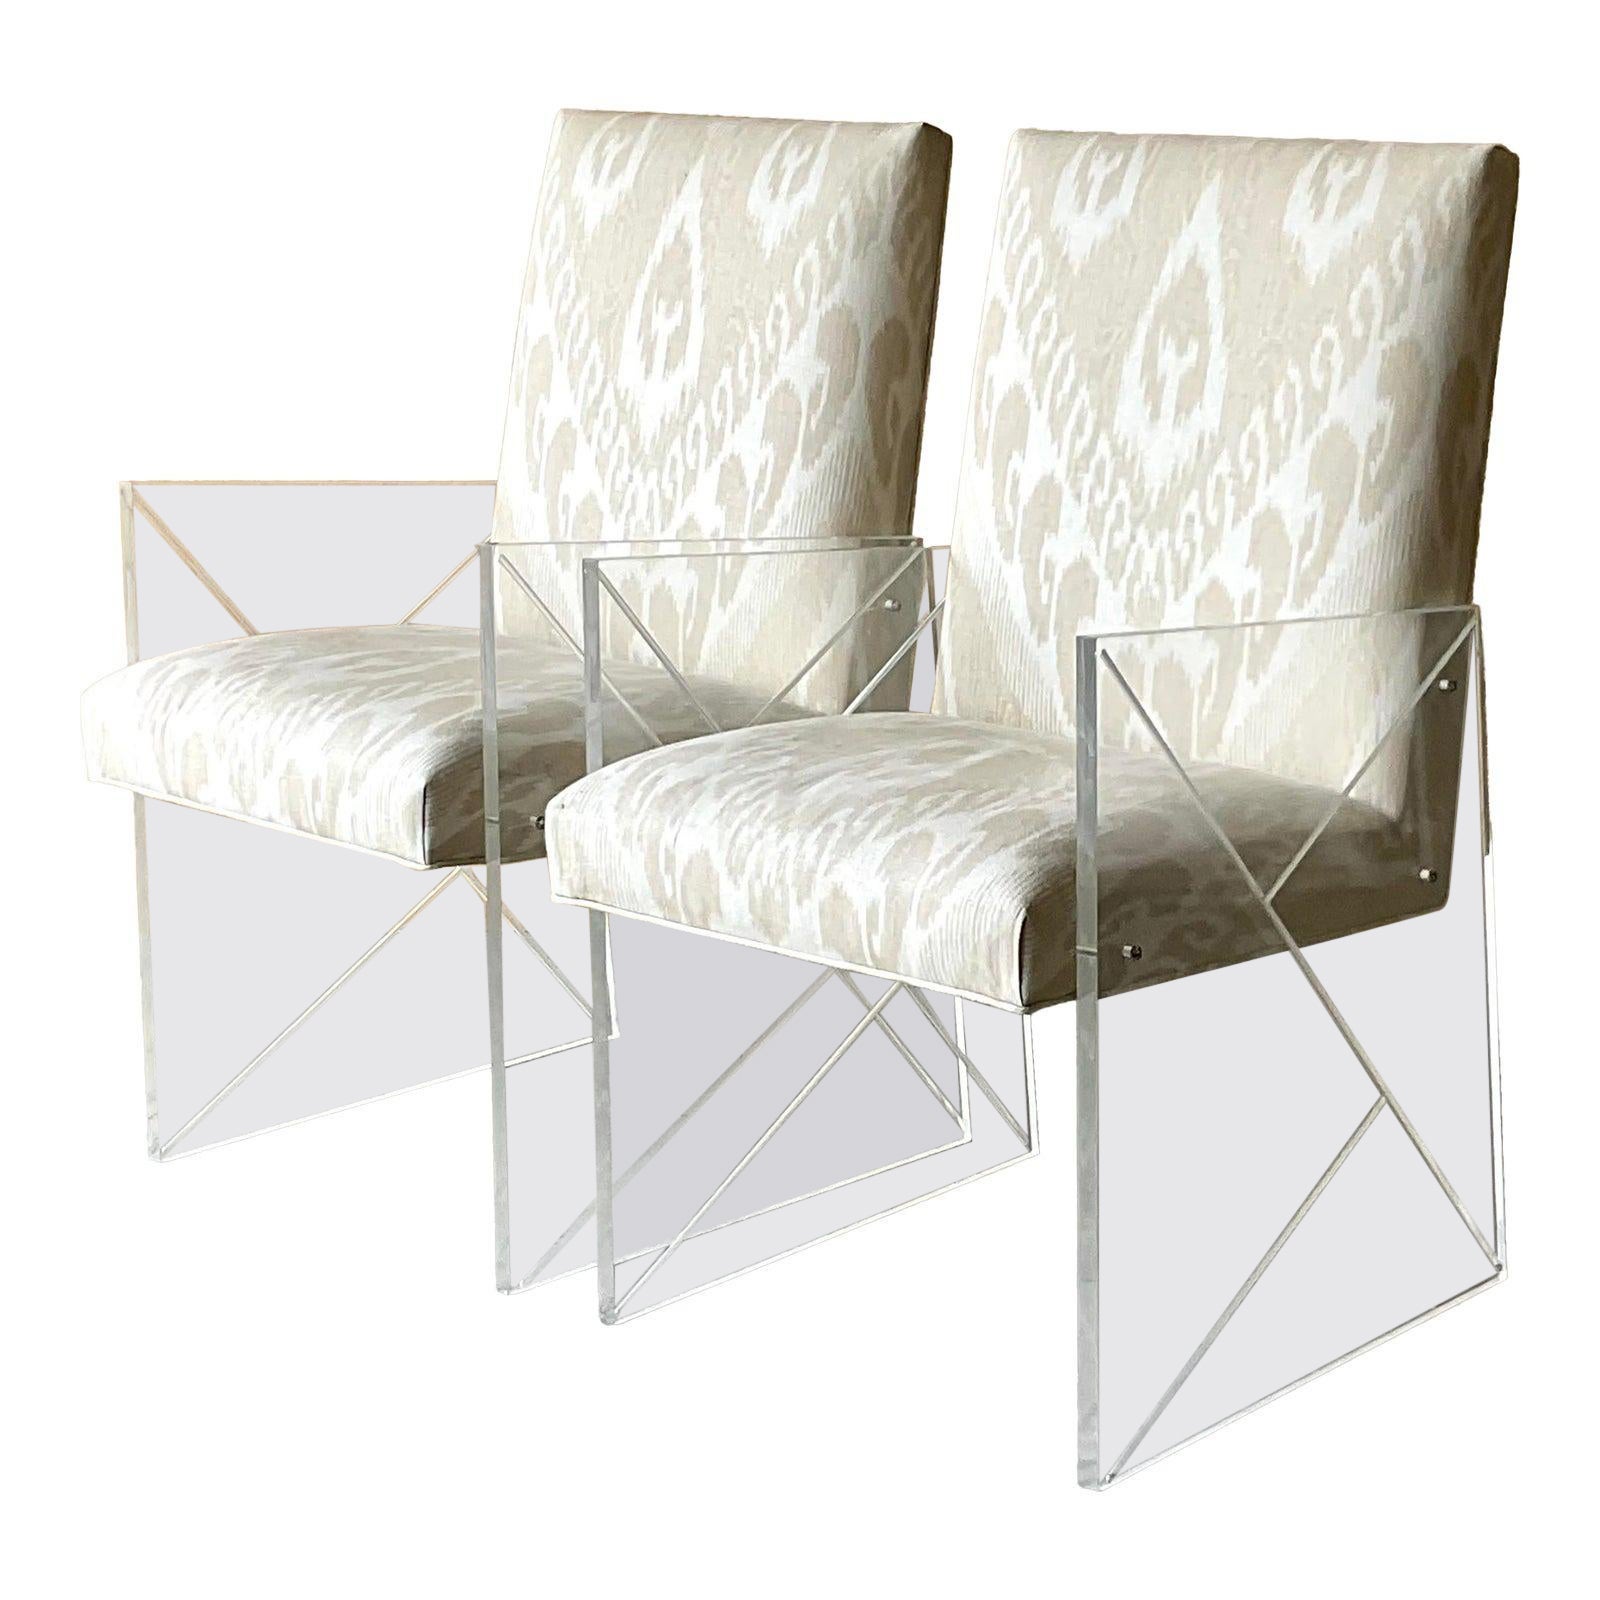 Vintage Boho French 60s Lucite Host Chairs in Thibaut Ikat - a Pair For Sale